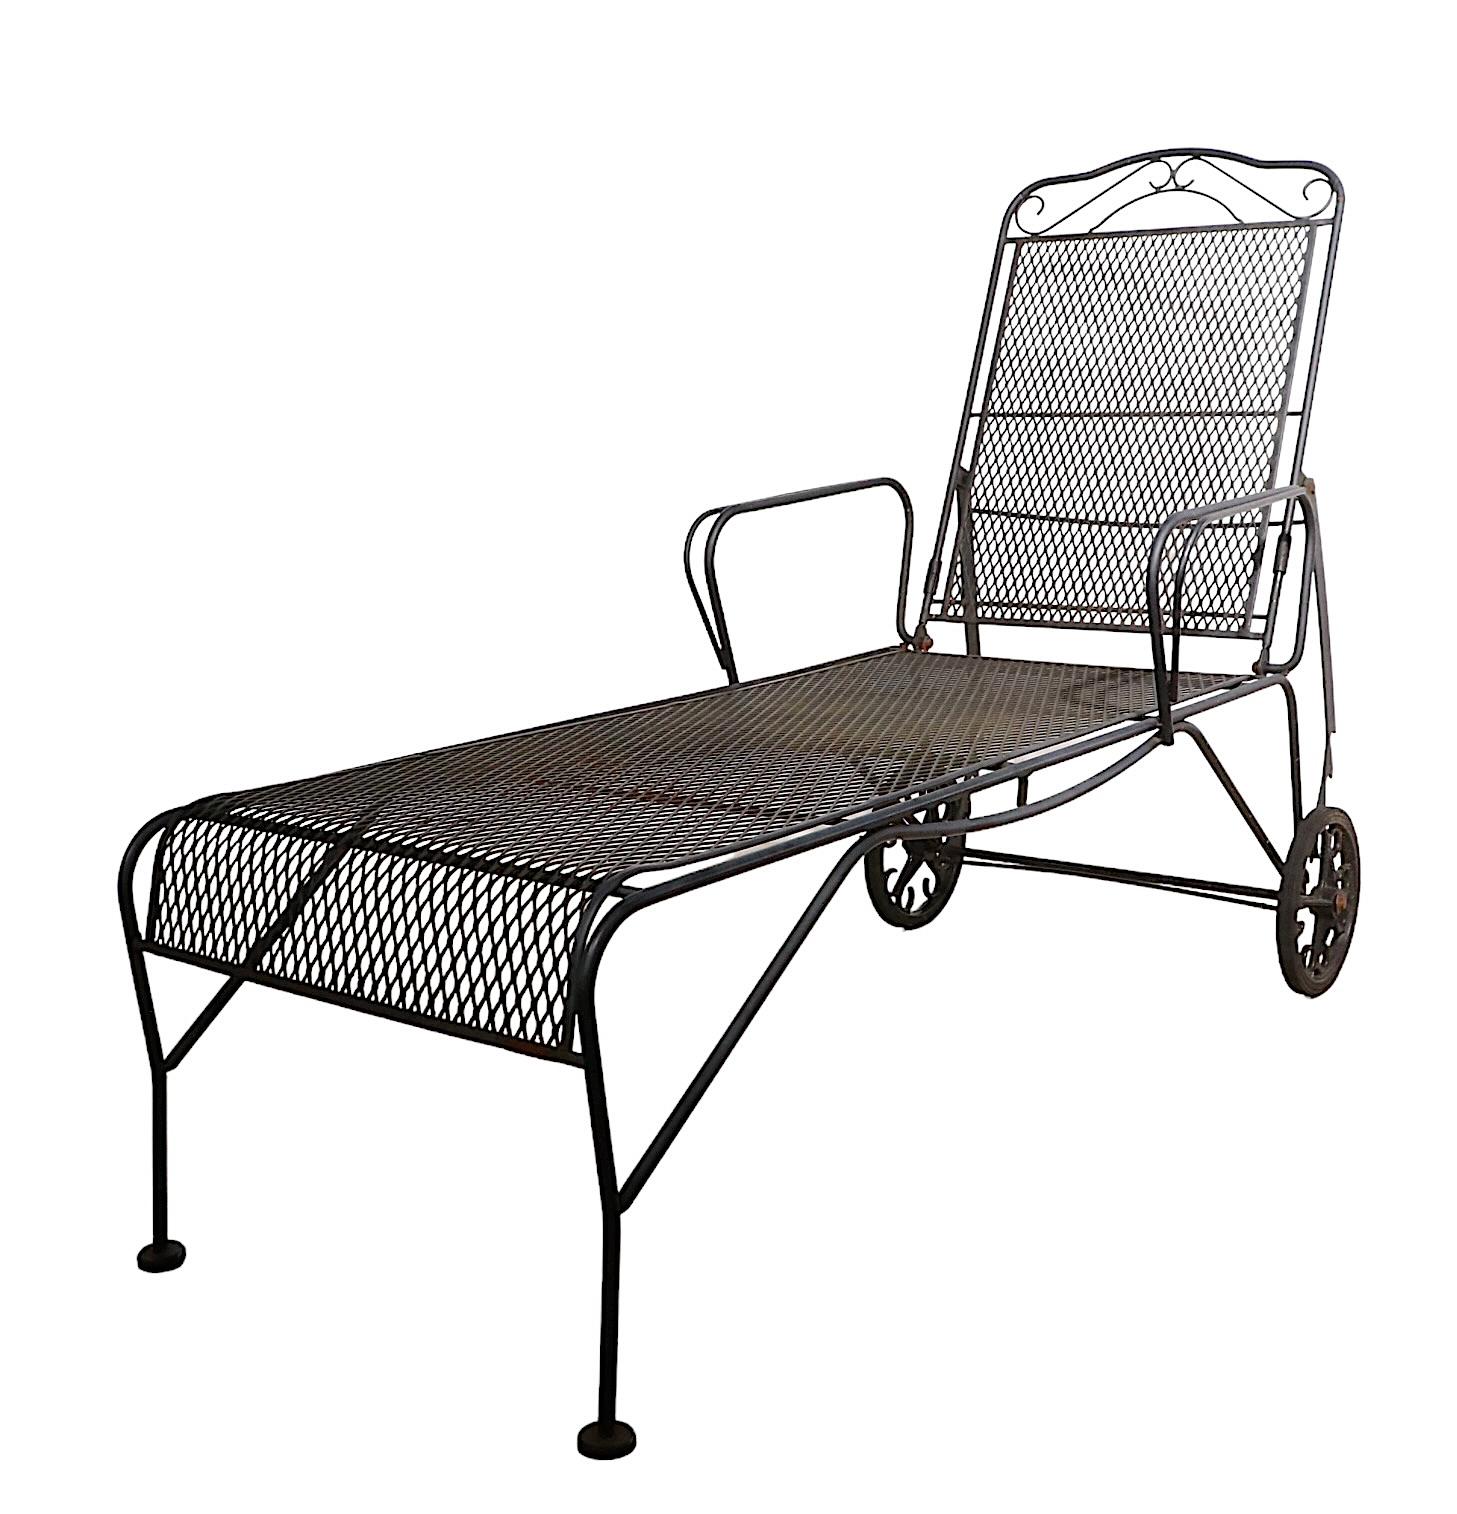 Wrought Iron Garden Patio Poolside Chaise Lounge Att. to Woodard For Sale 6